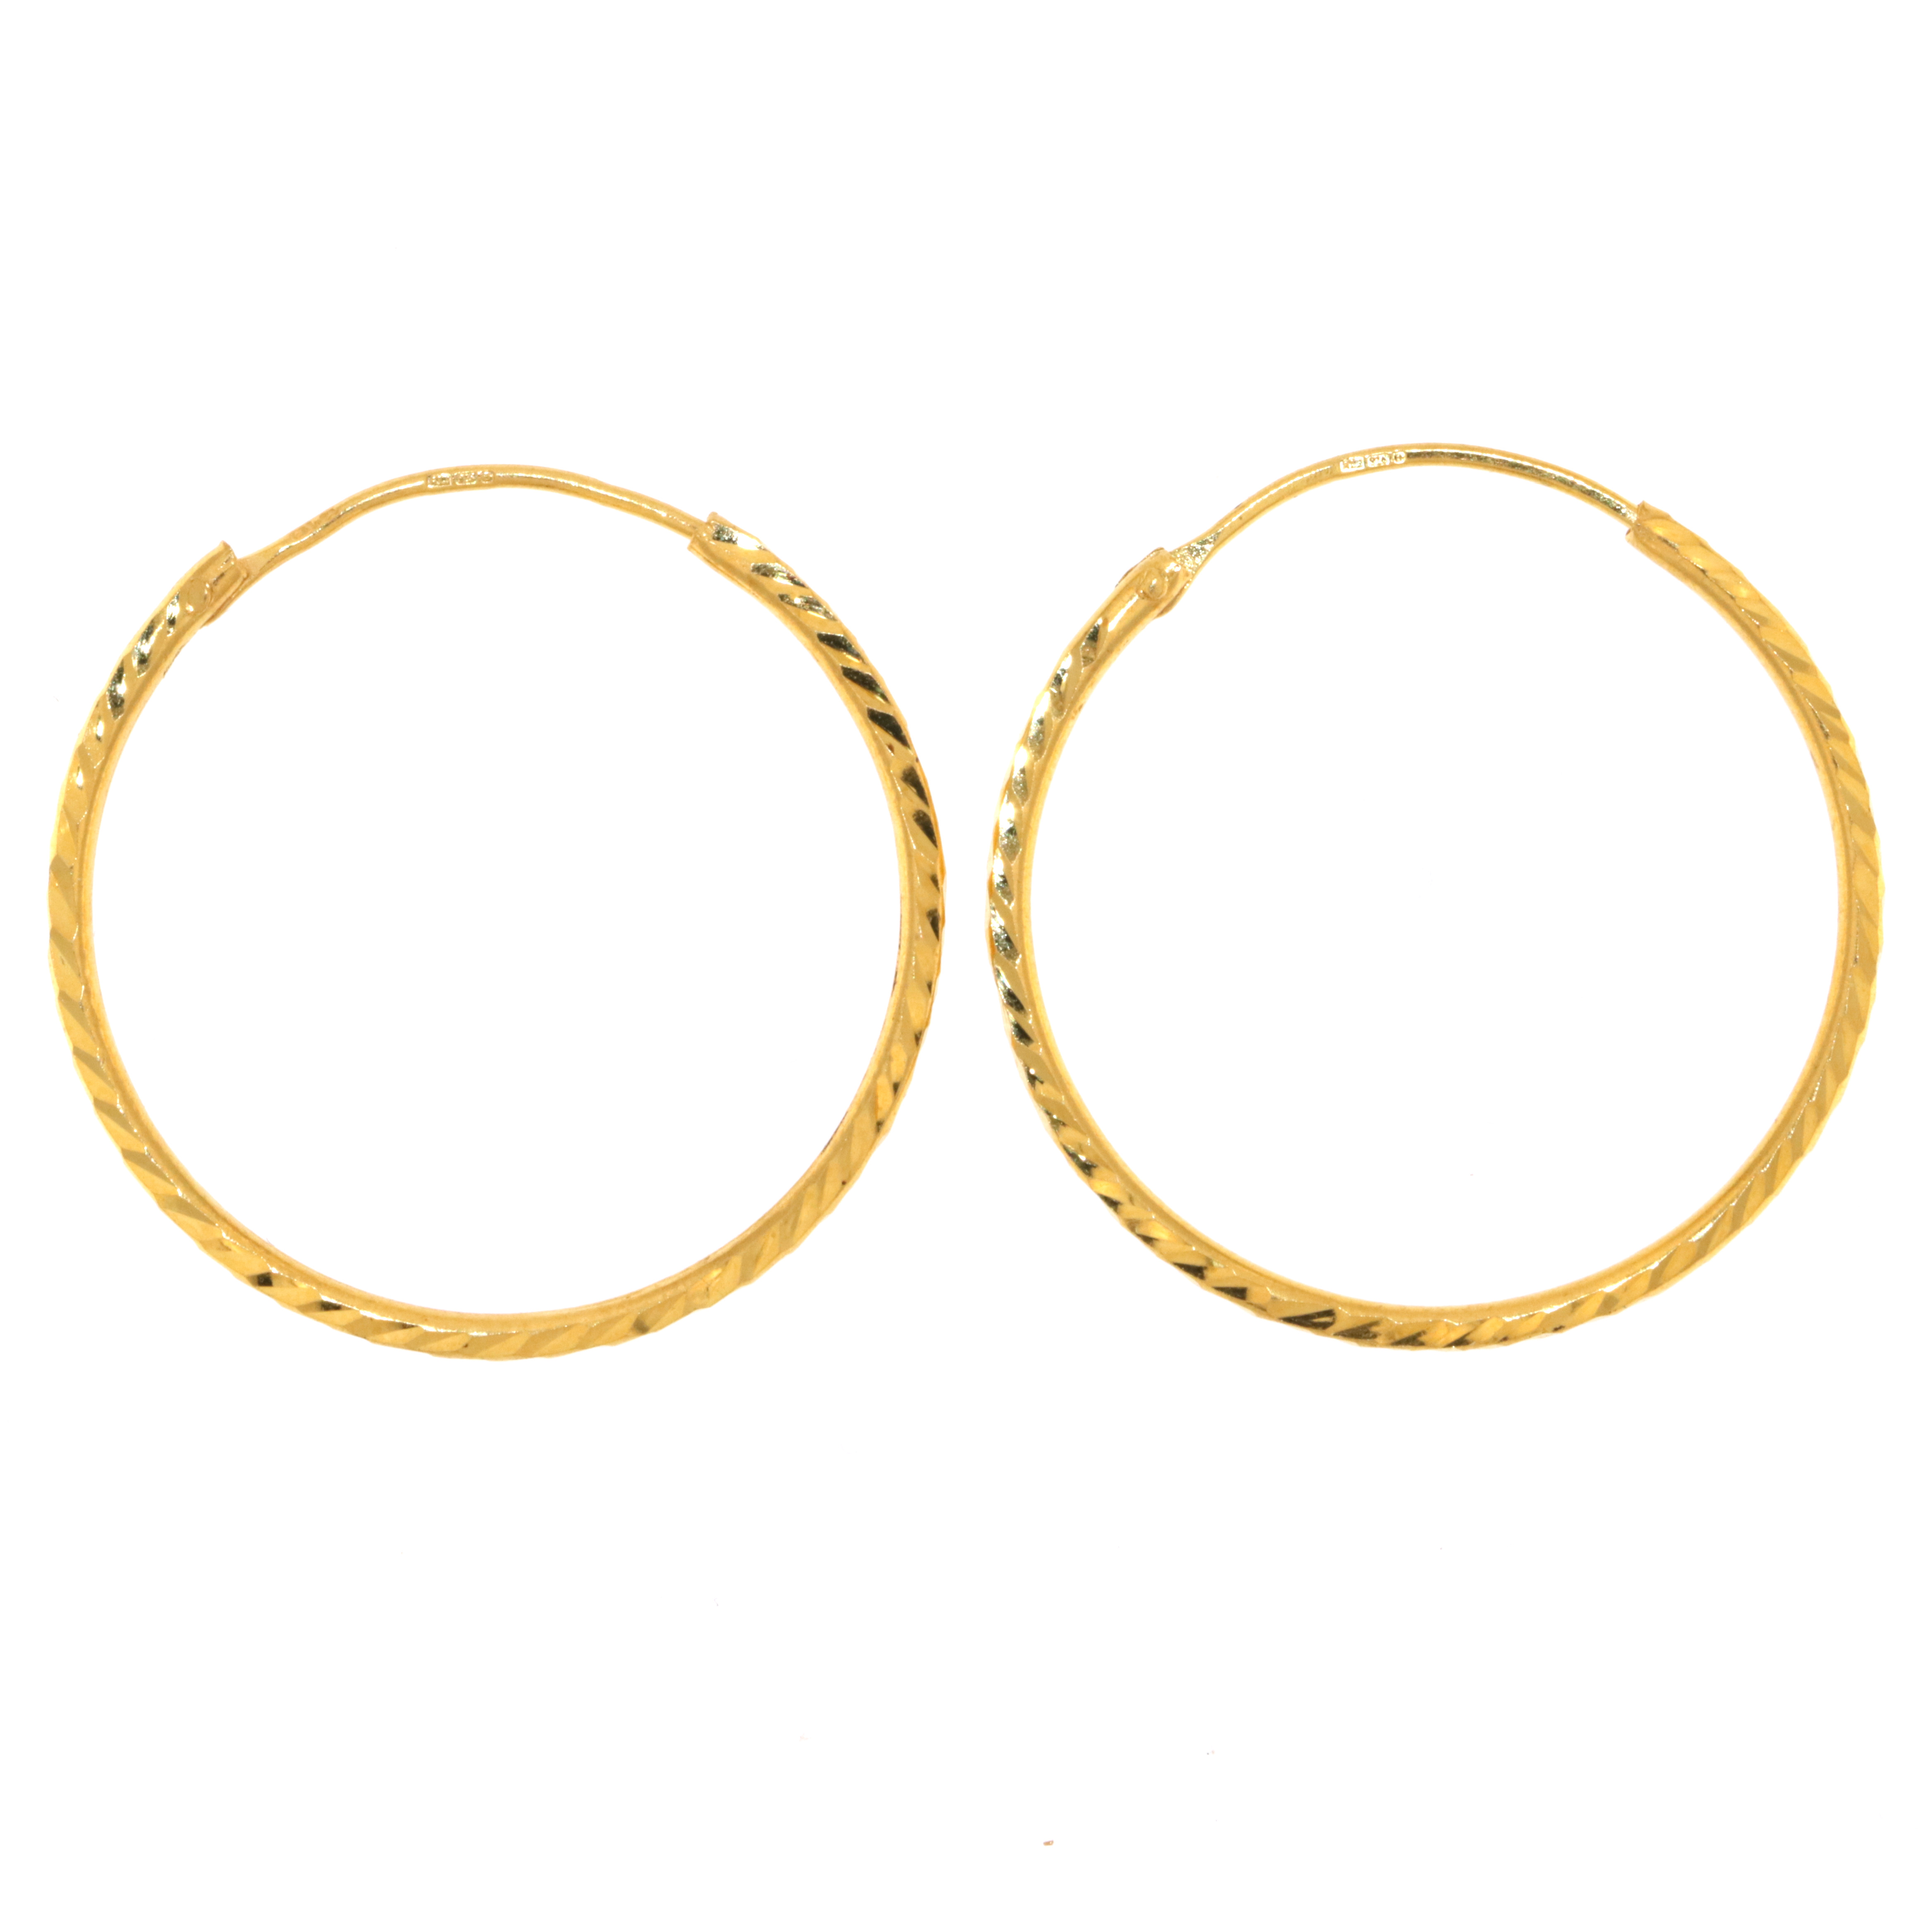 22ct Real Gold Asian/Indian/Pakistani Style Hoop Earrings